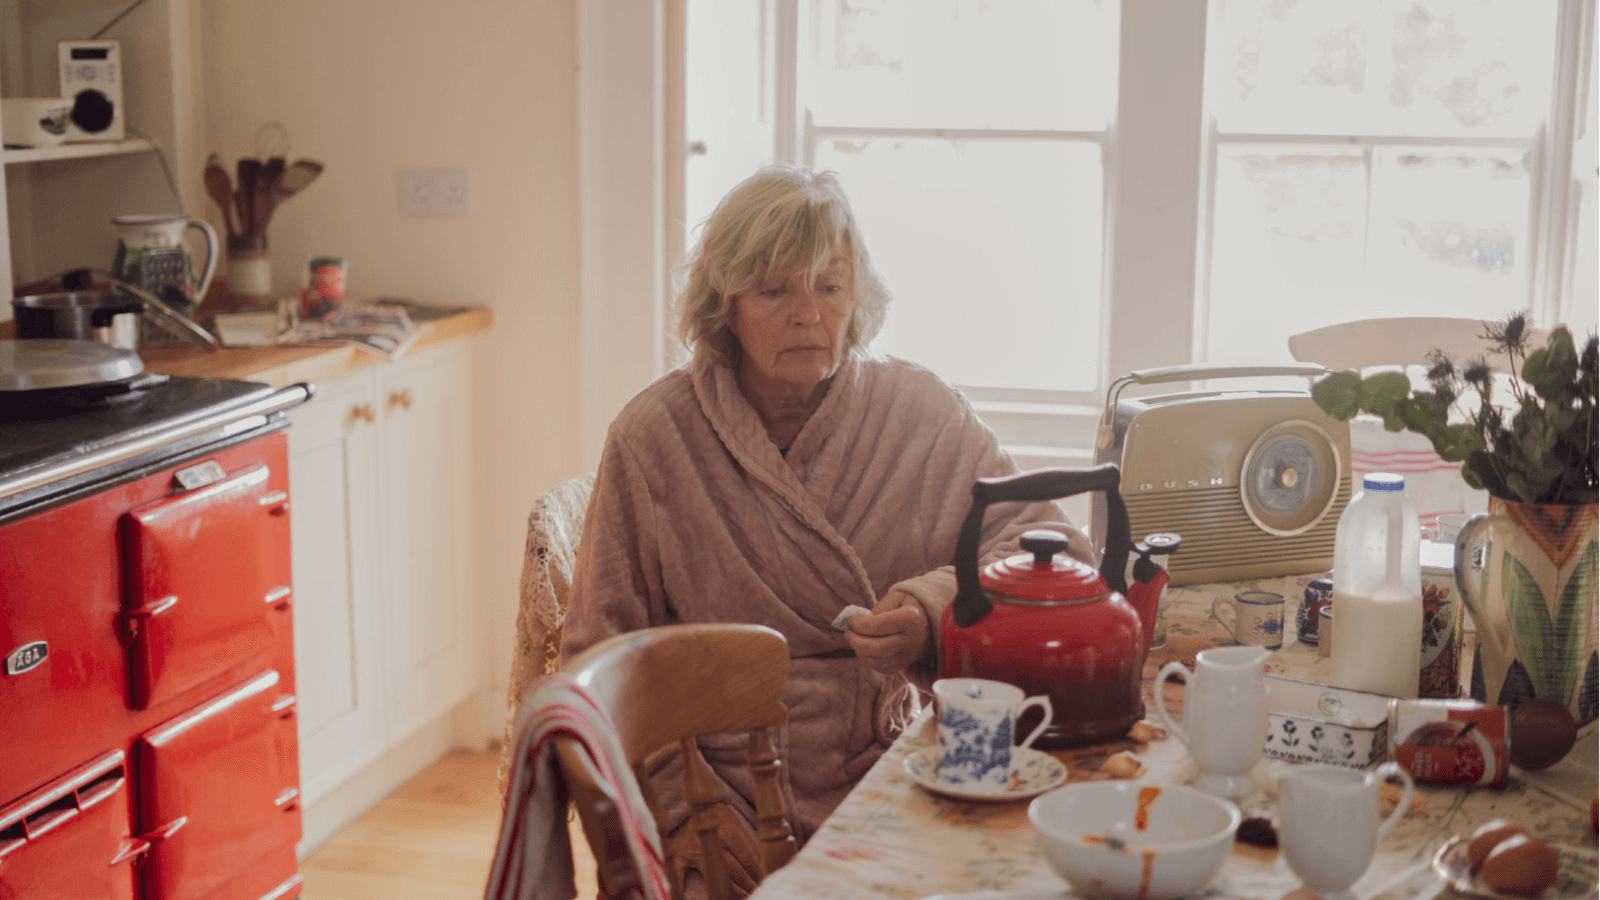 Still from My Name is Beth. Elderly woman in dressing gown sits at messy kitchen table with a red teapot in front of her and solemn expression on her face.